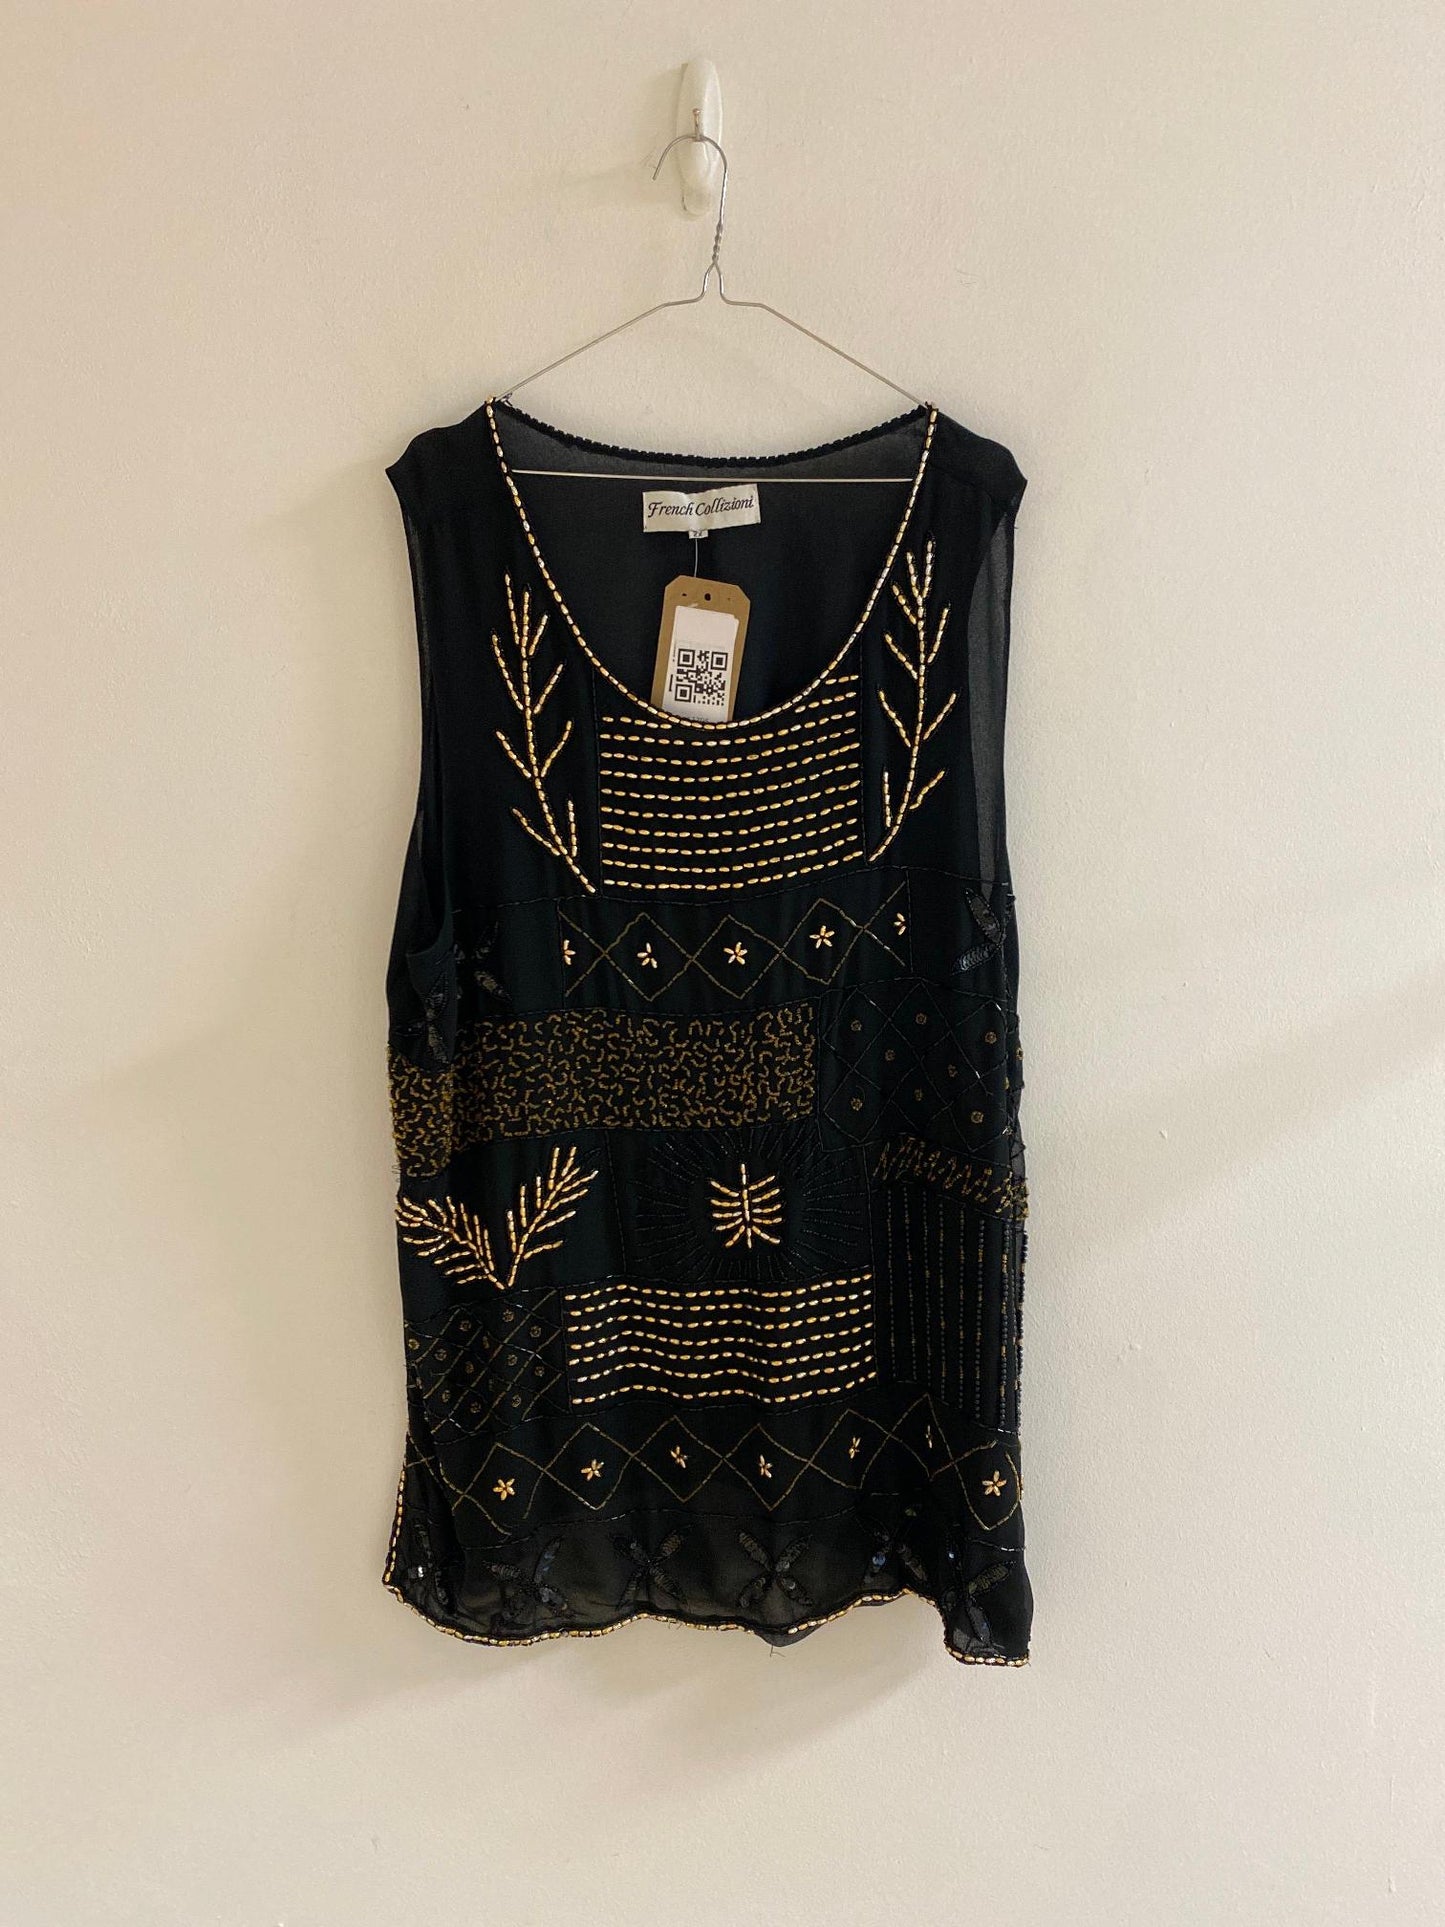 Black and Gold Embellished Top, French Collizioni, Size 2XL - Damaged Item Sale